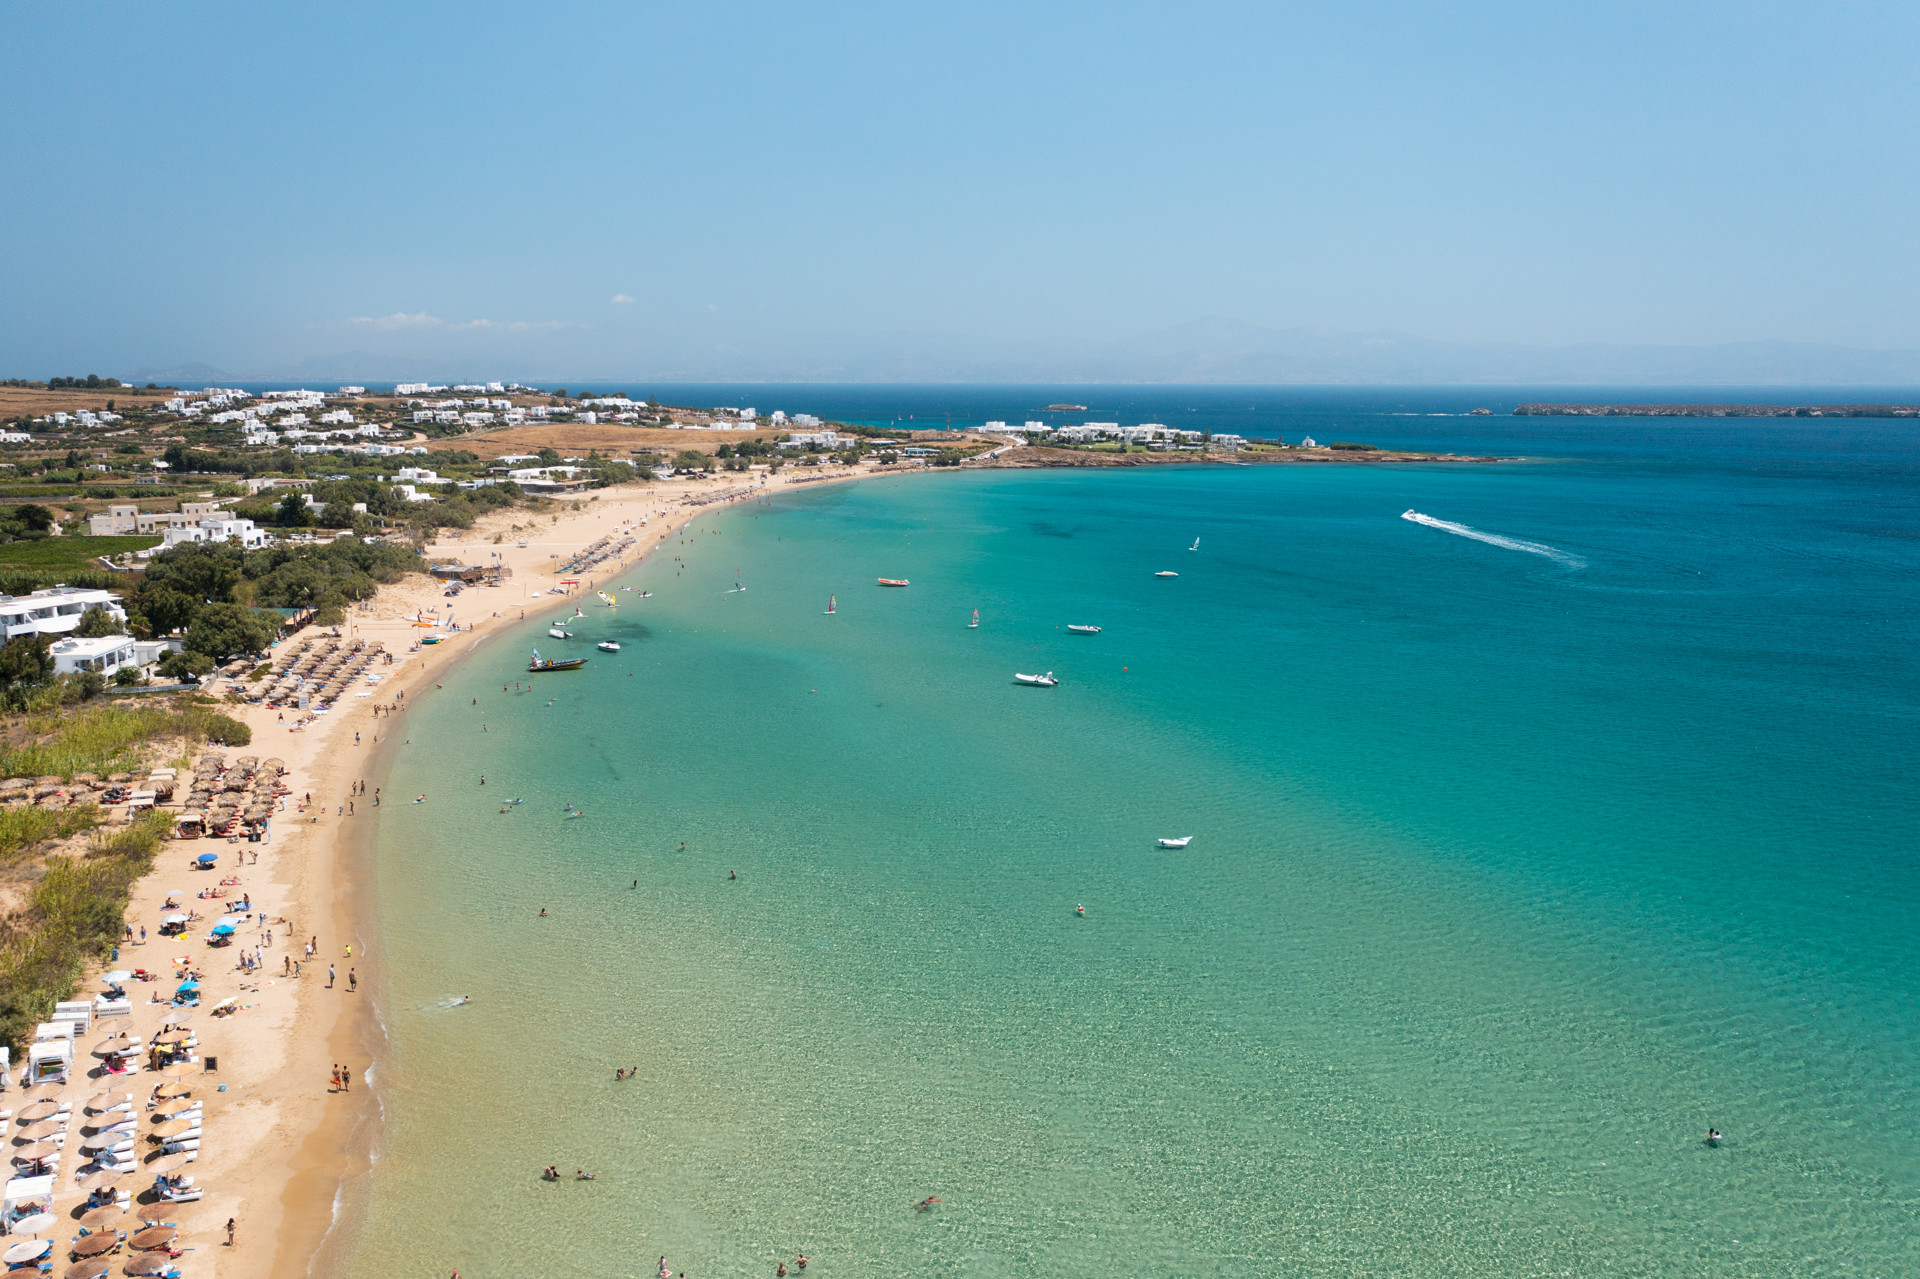 Paros’ Chrissi Akti beach is named after its golden sand